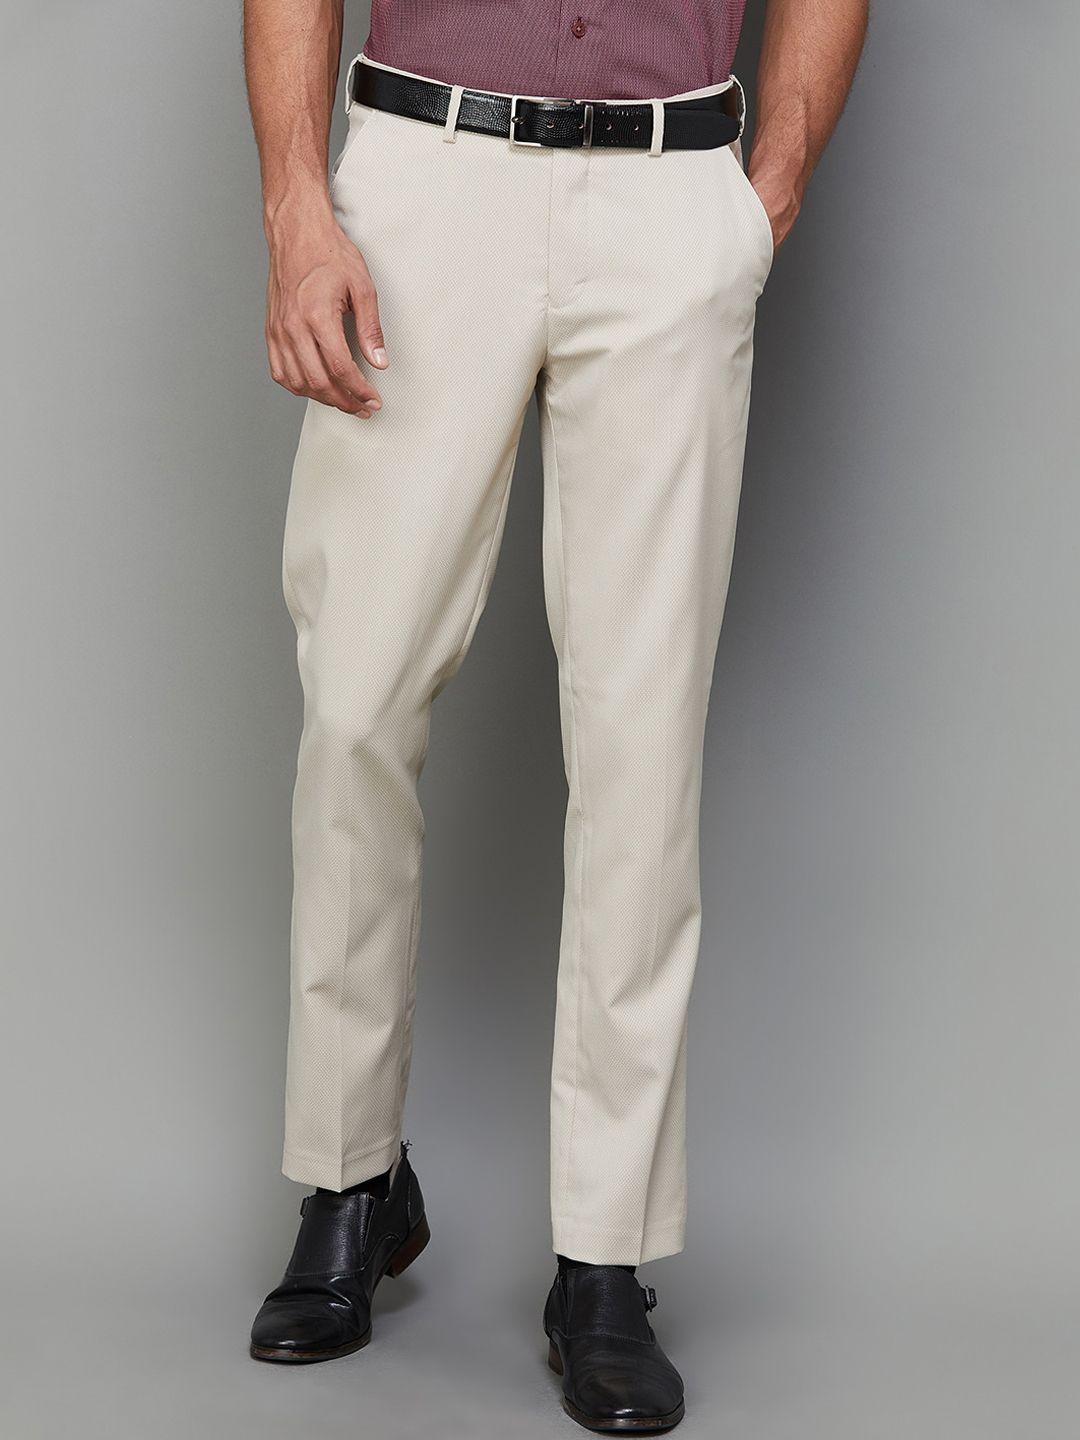 code by lifestyle men slim fit formal trousers